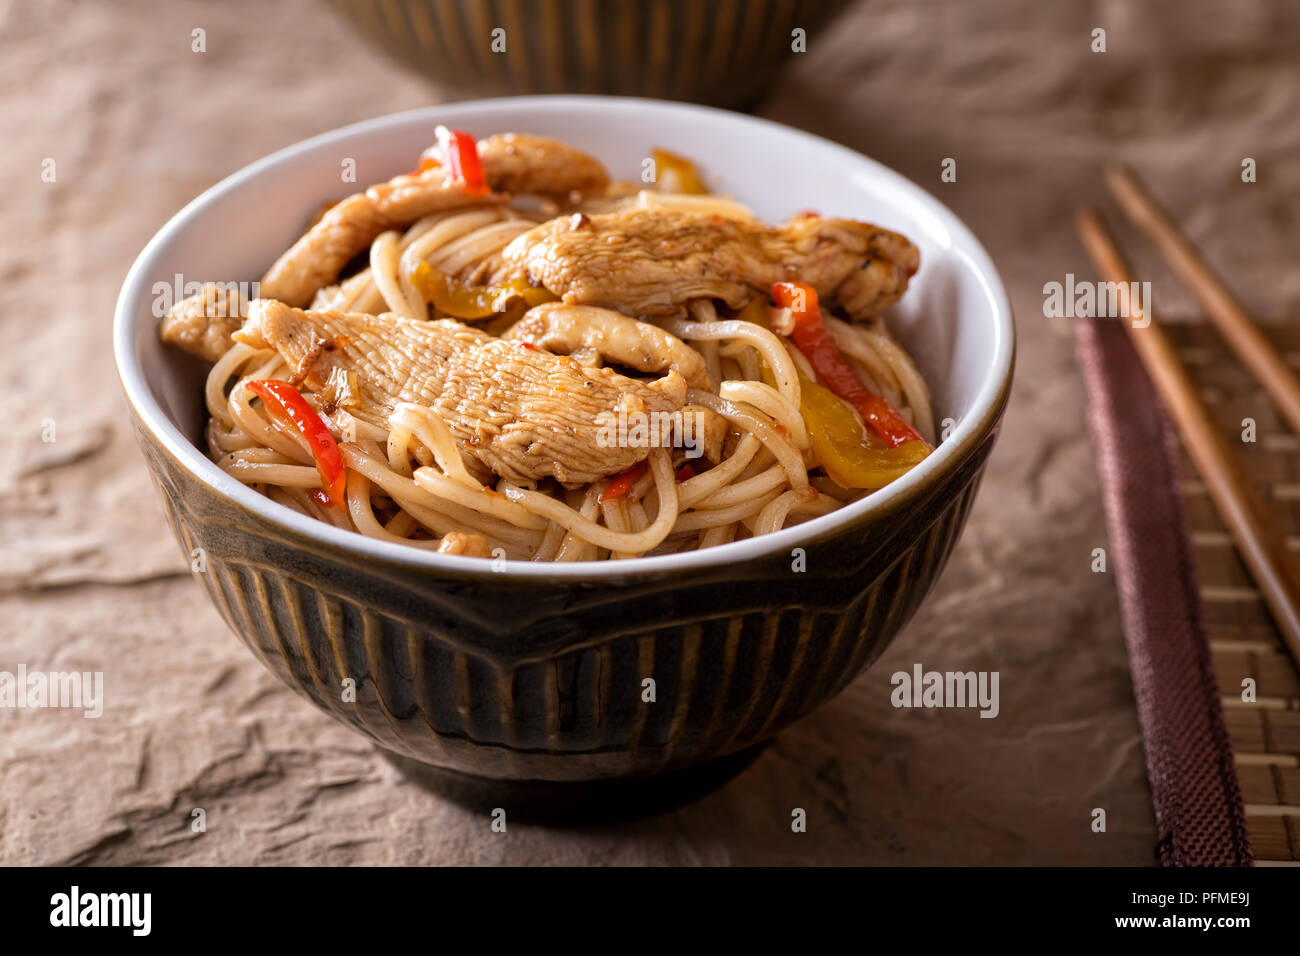 A bowl of delicious honey garlic noodles with chicken and peppers. Stock Photo